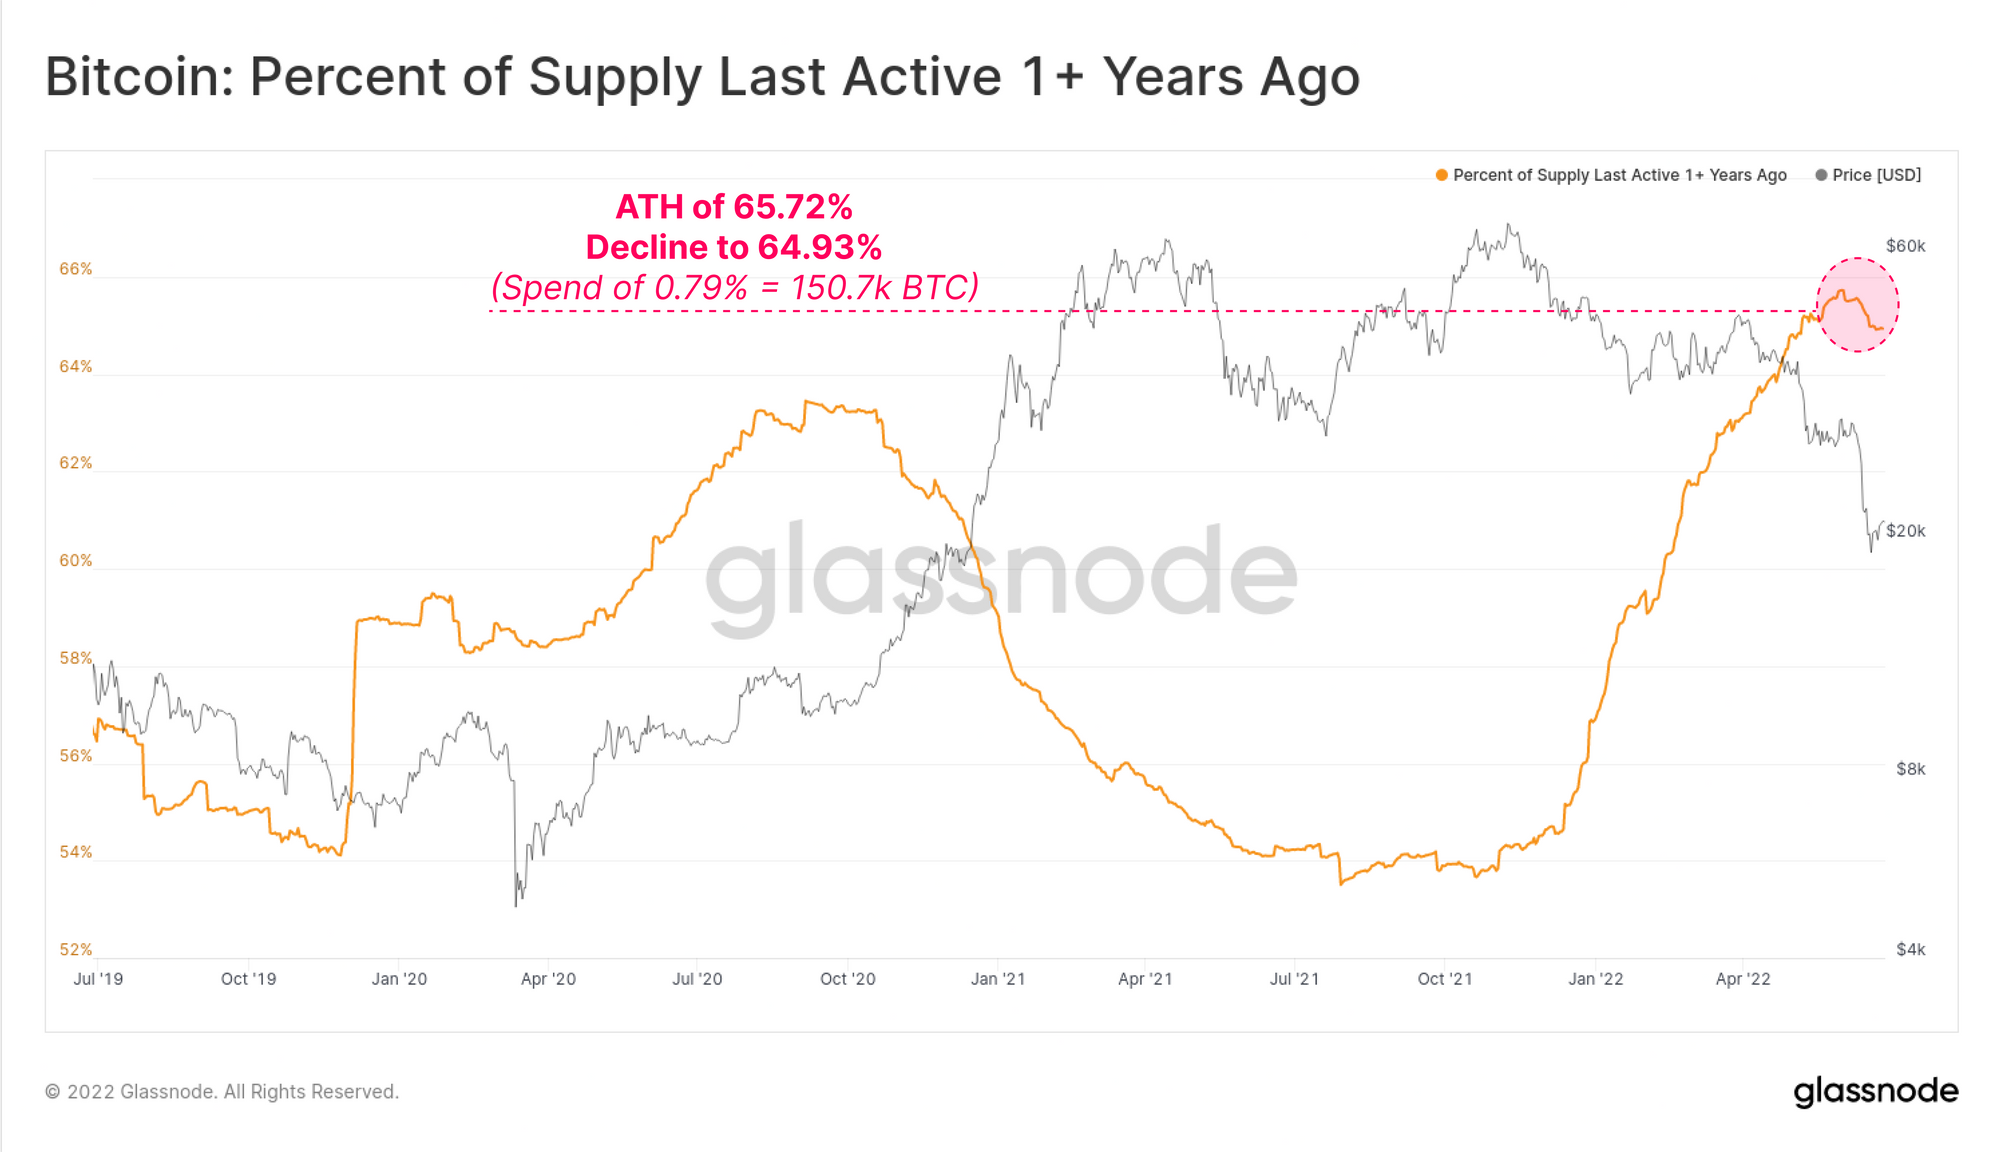 Bitcoin: Percent of Supply Last Active 1+ Year Ago